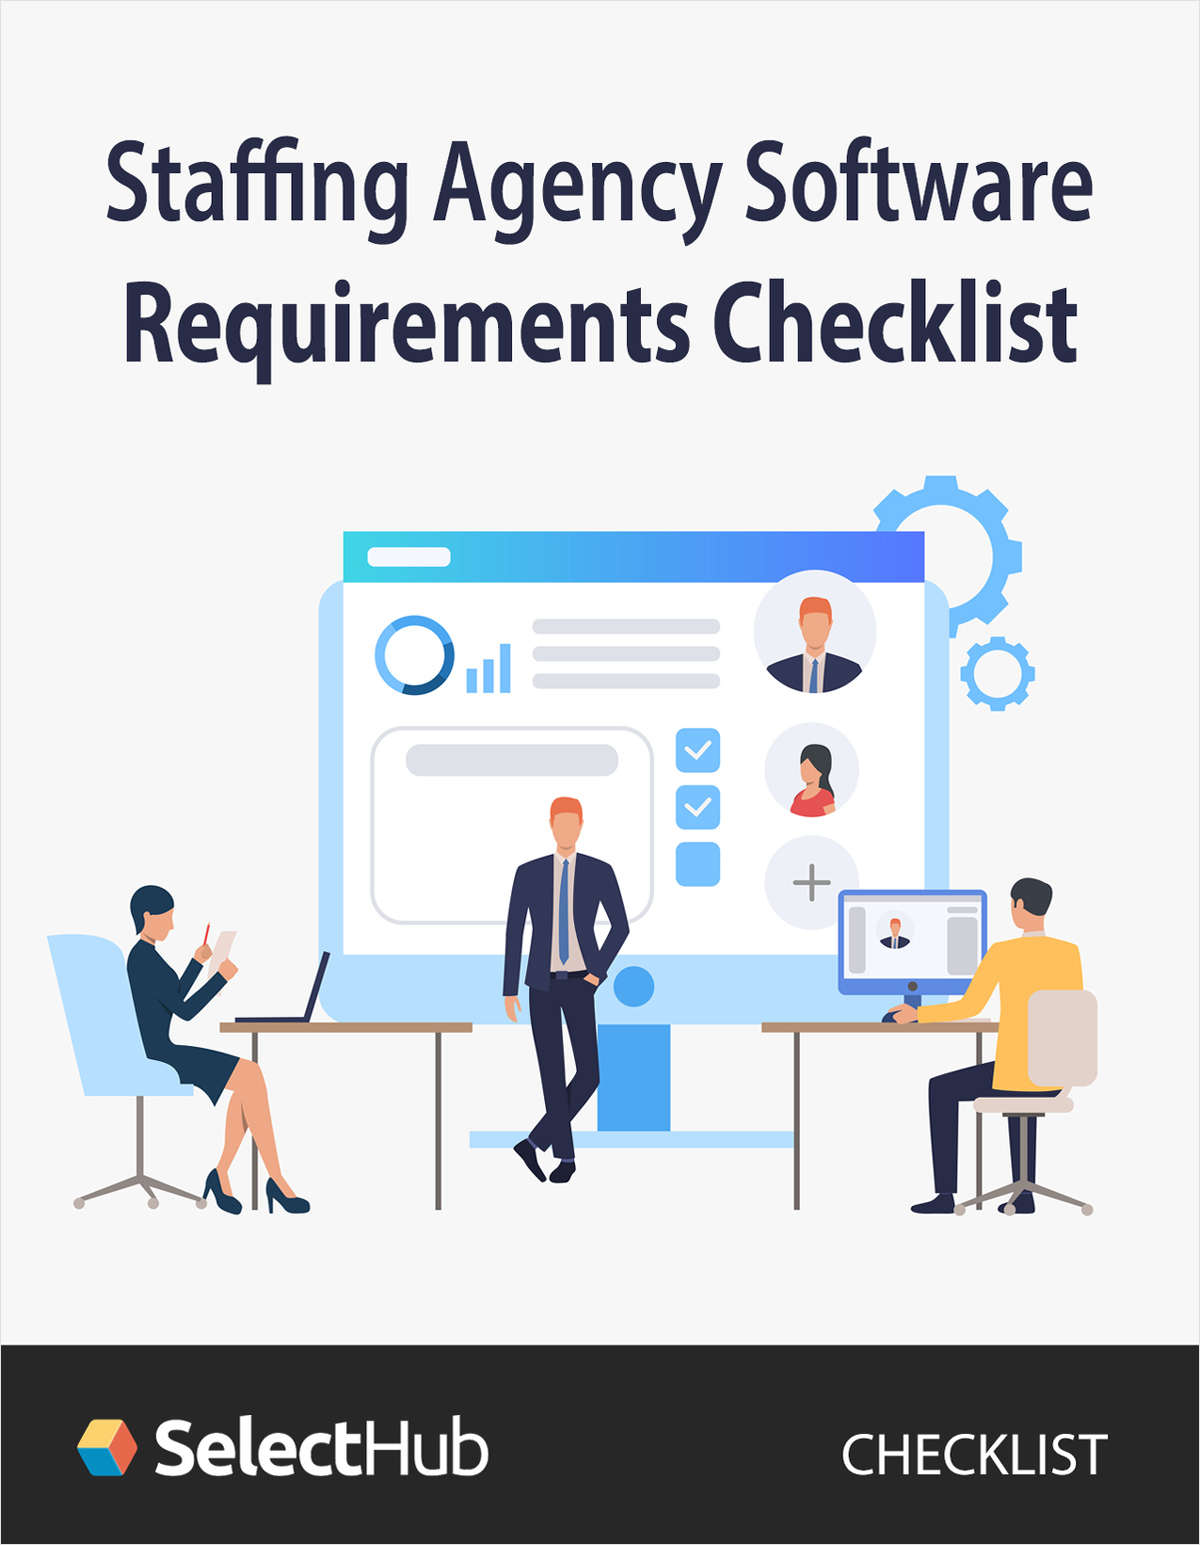 Staffing Agency Software Requirements Checklist